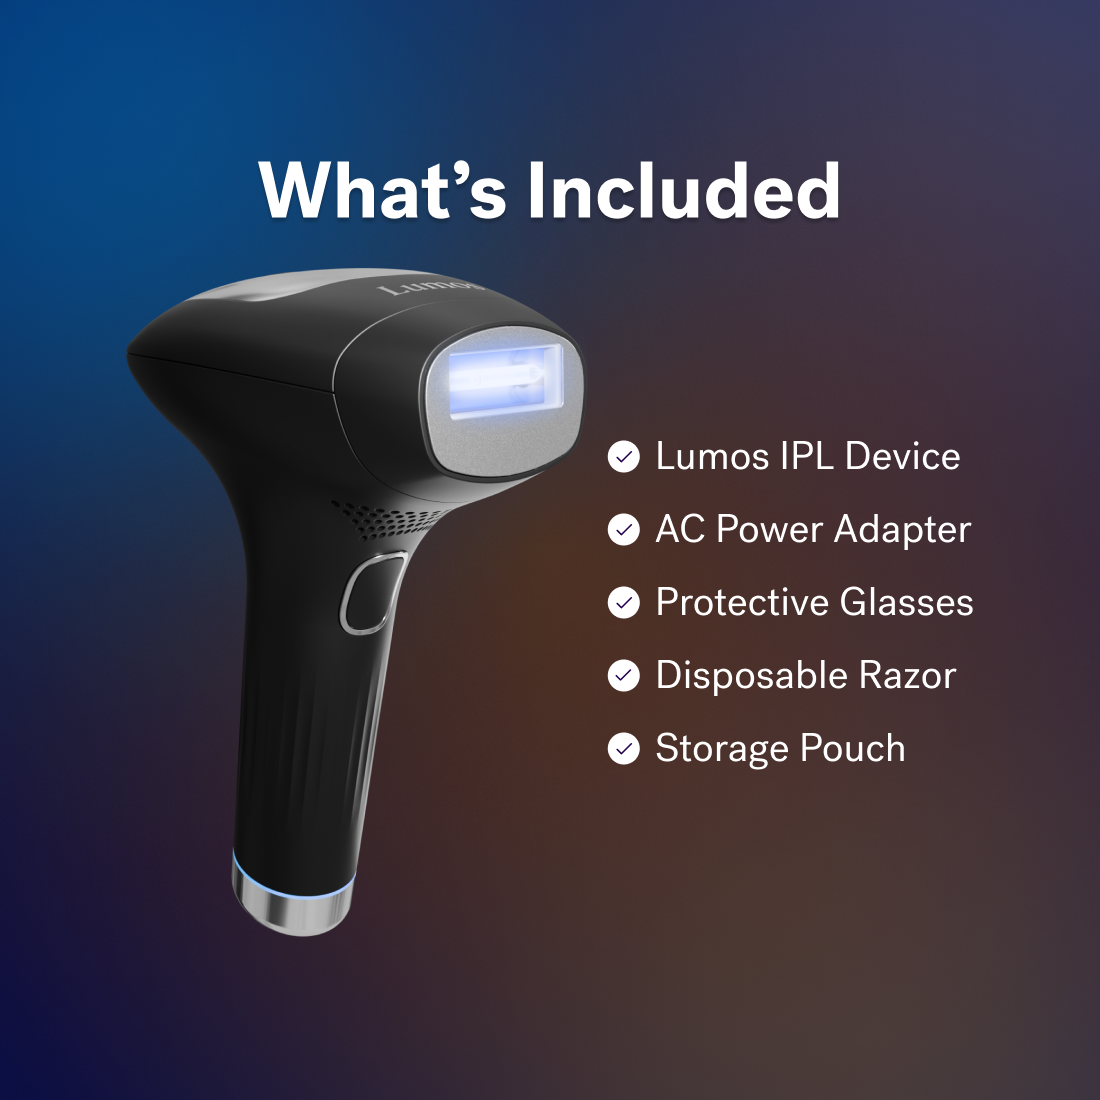 Black - A Michael Todd Beauty Lumos IPL device featuring COOLMAX cooling technology, AC power adapter, protective glasses, disposable razor, and storage pouch are displayed with the text "What's Included" above.